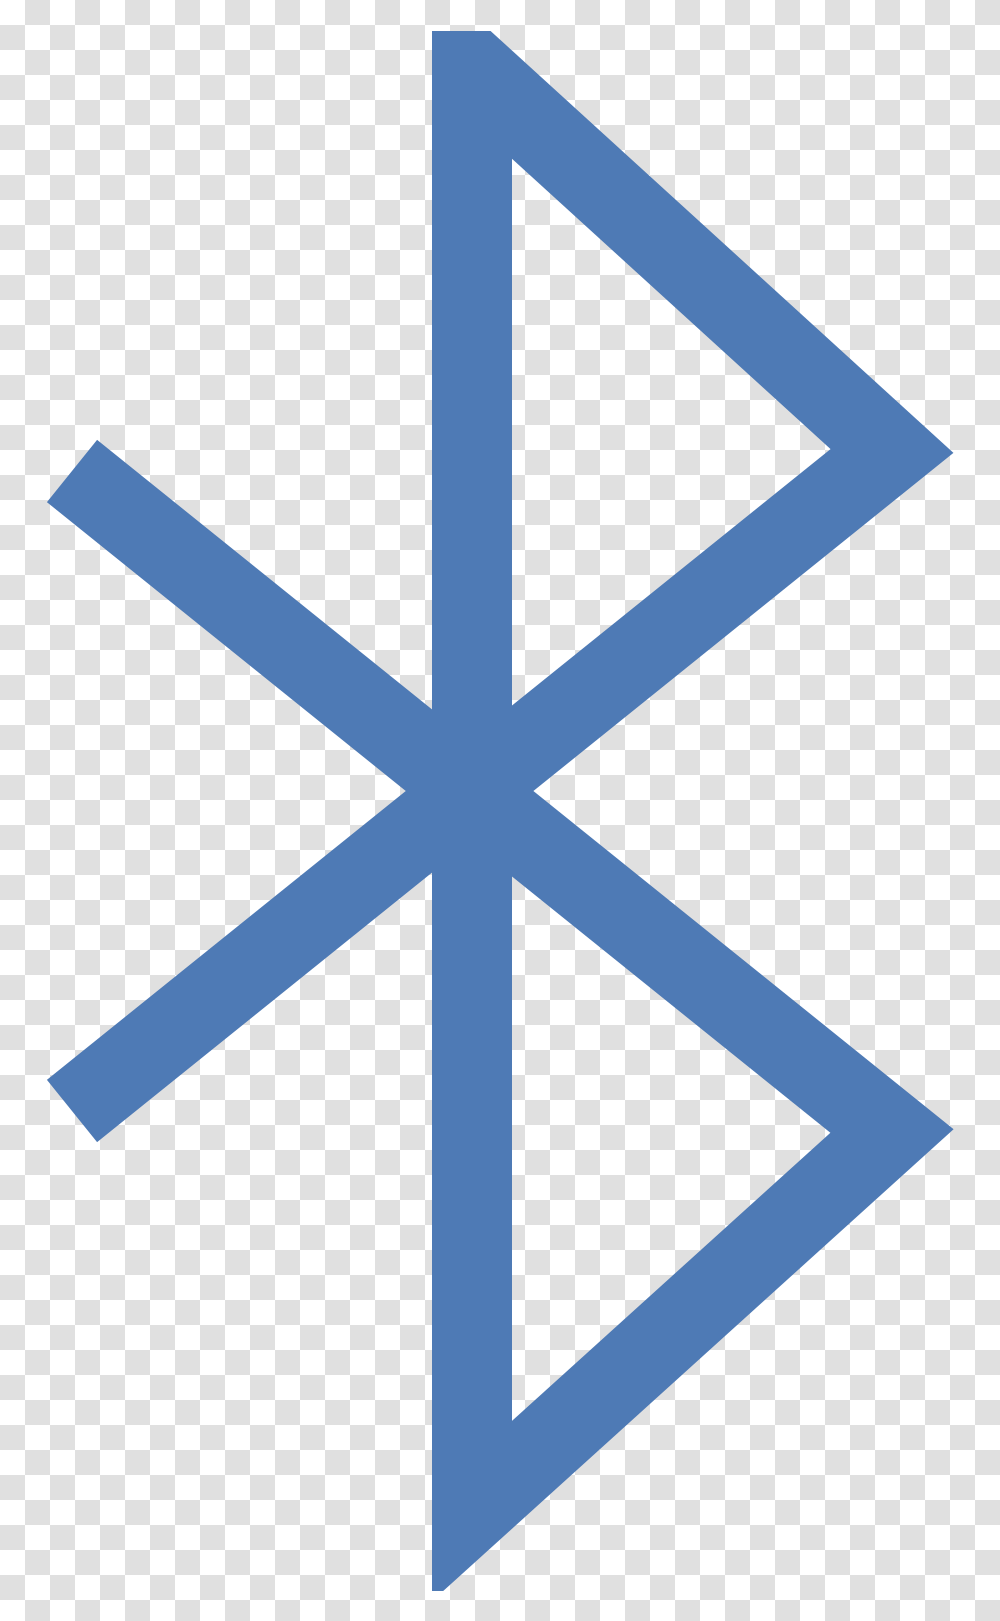 King Harald Bluetooth Image Background Bluetooth Icon, Symbol, Cross, Pattern, Logo Transparent Png